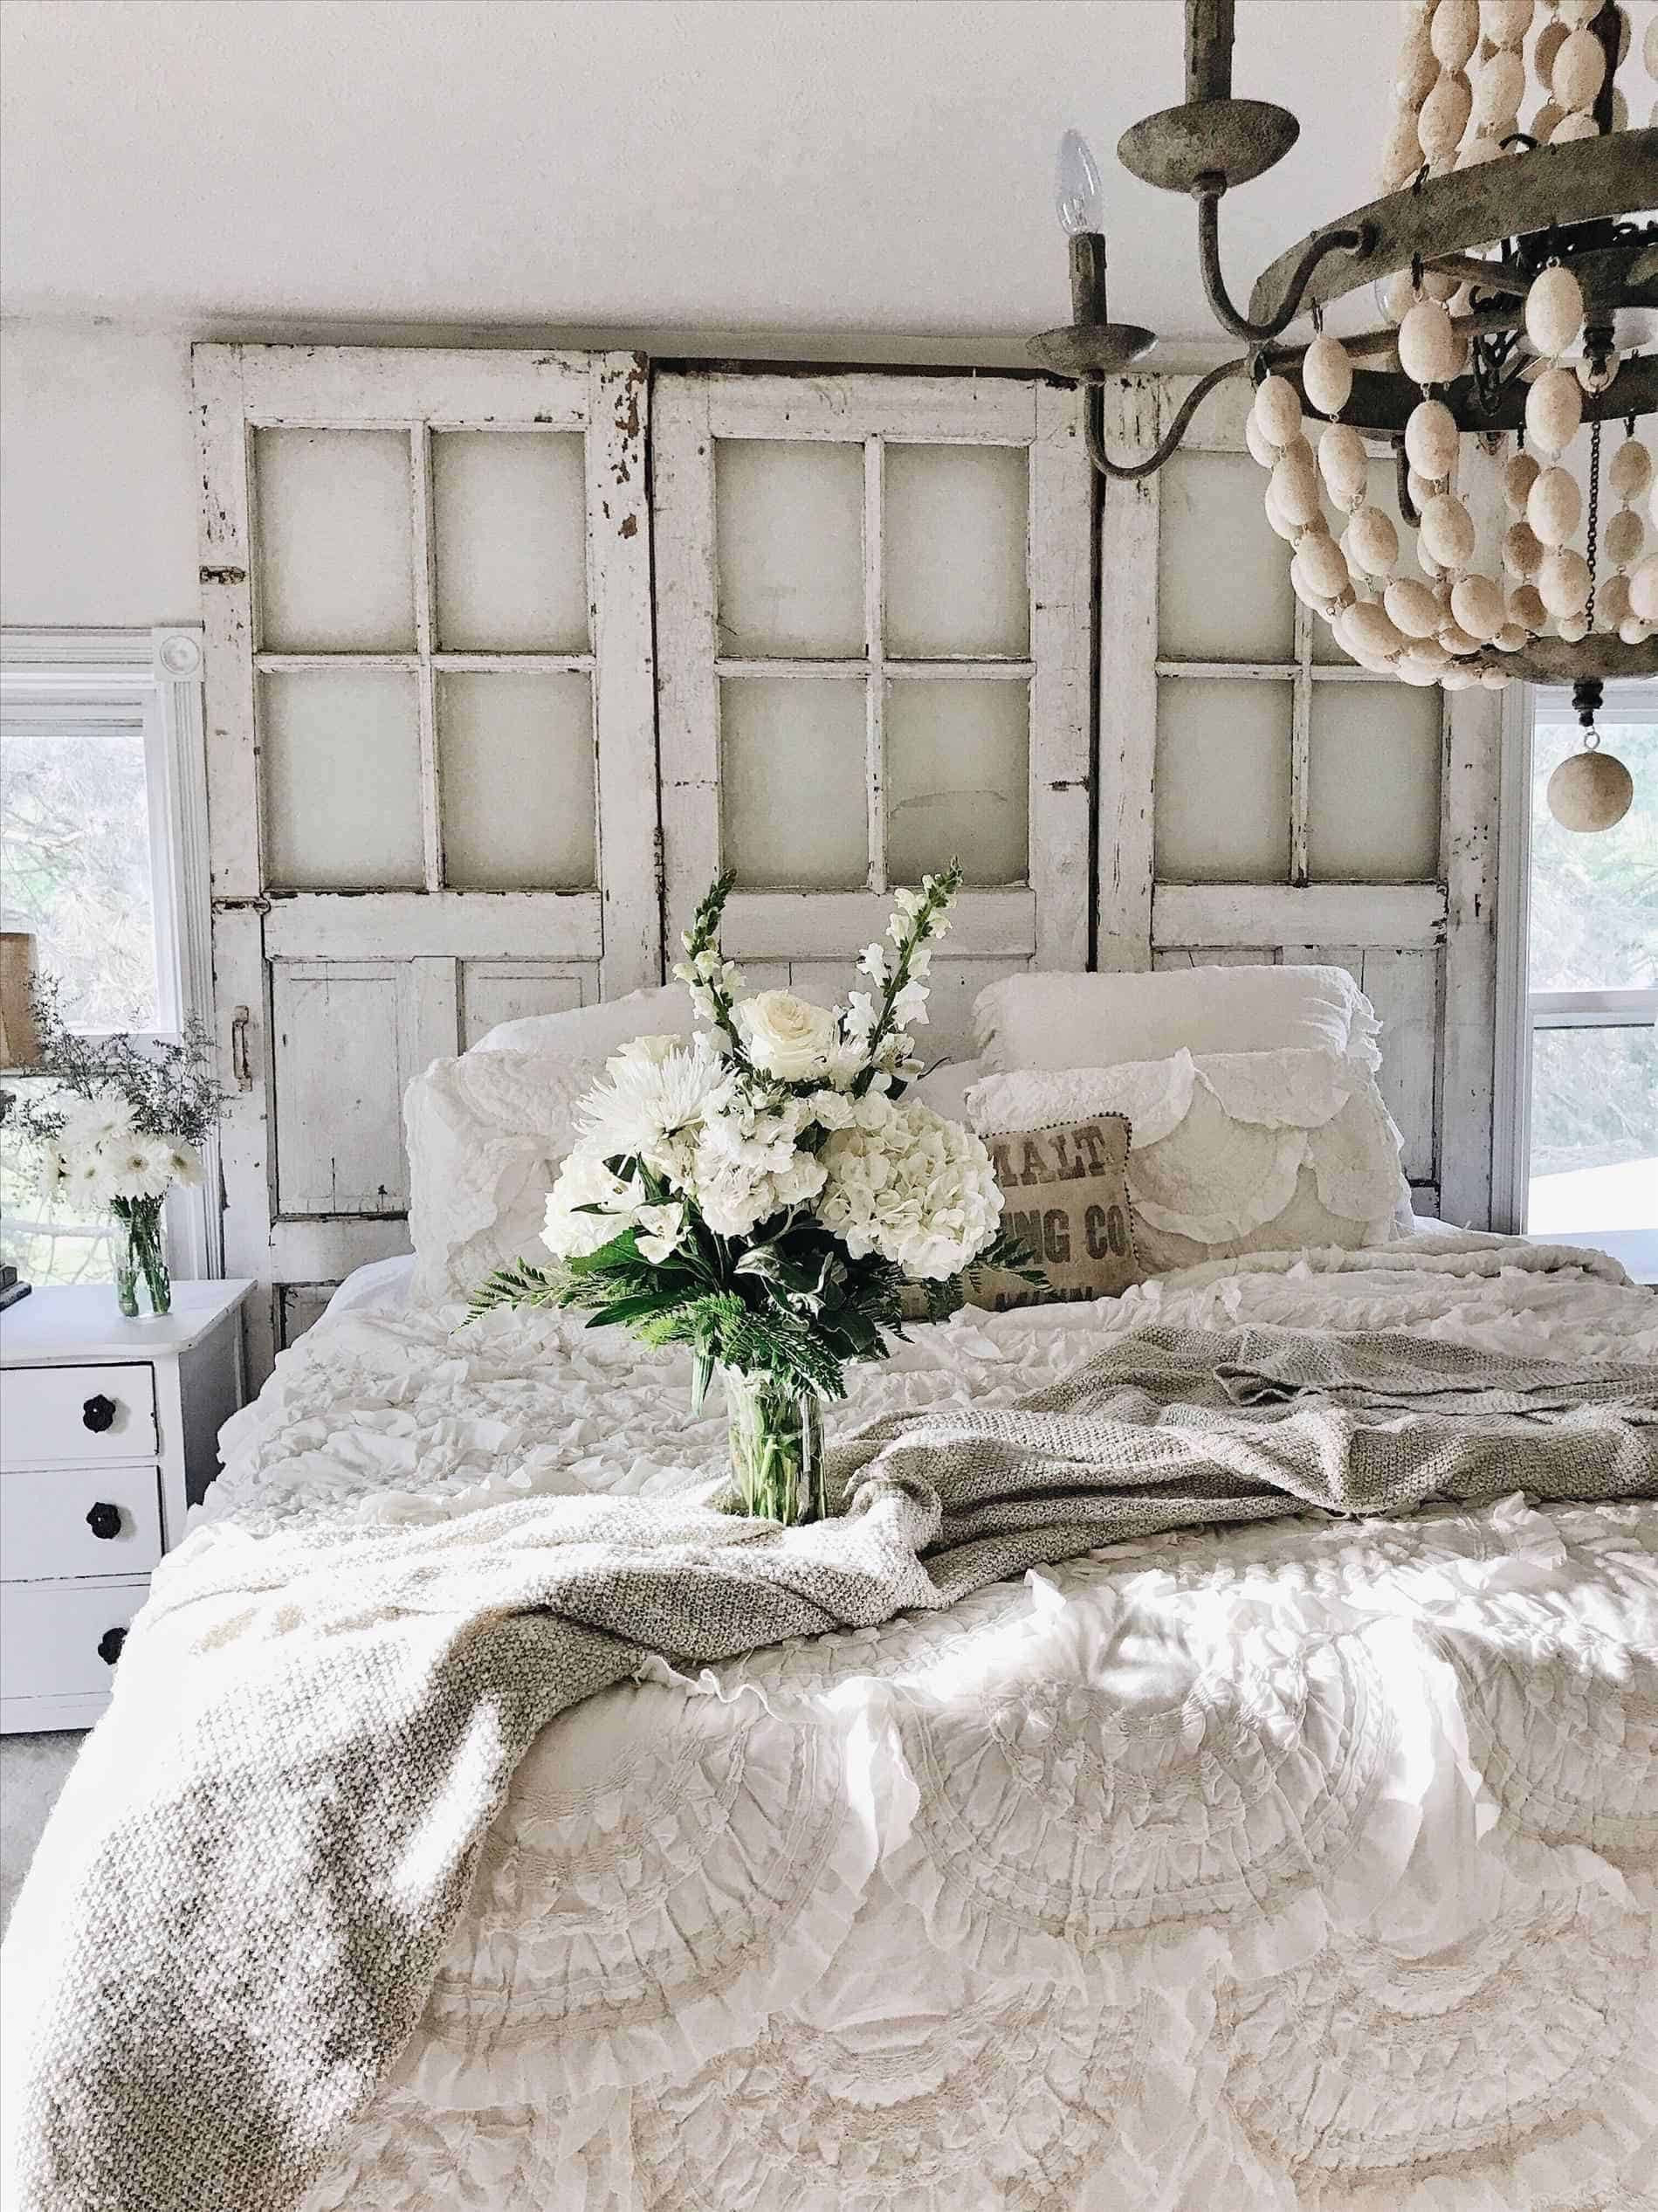 Shabby Chic Bedrooms Images Fresh Beautiful Shabby Chic Bedroom Ideas to Take In Consideration